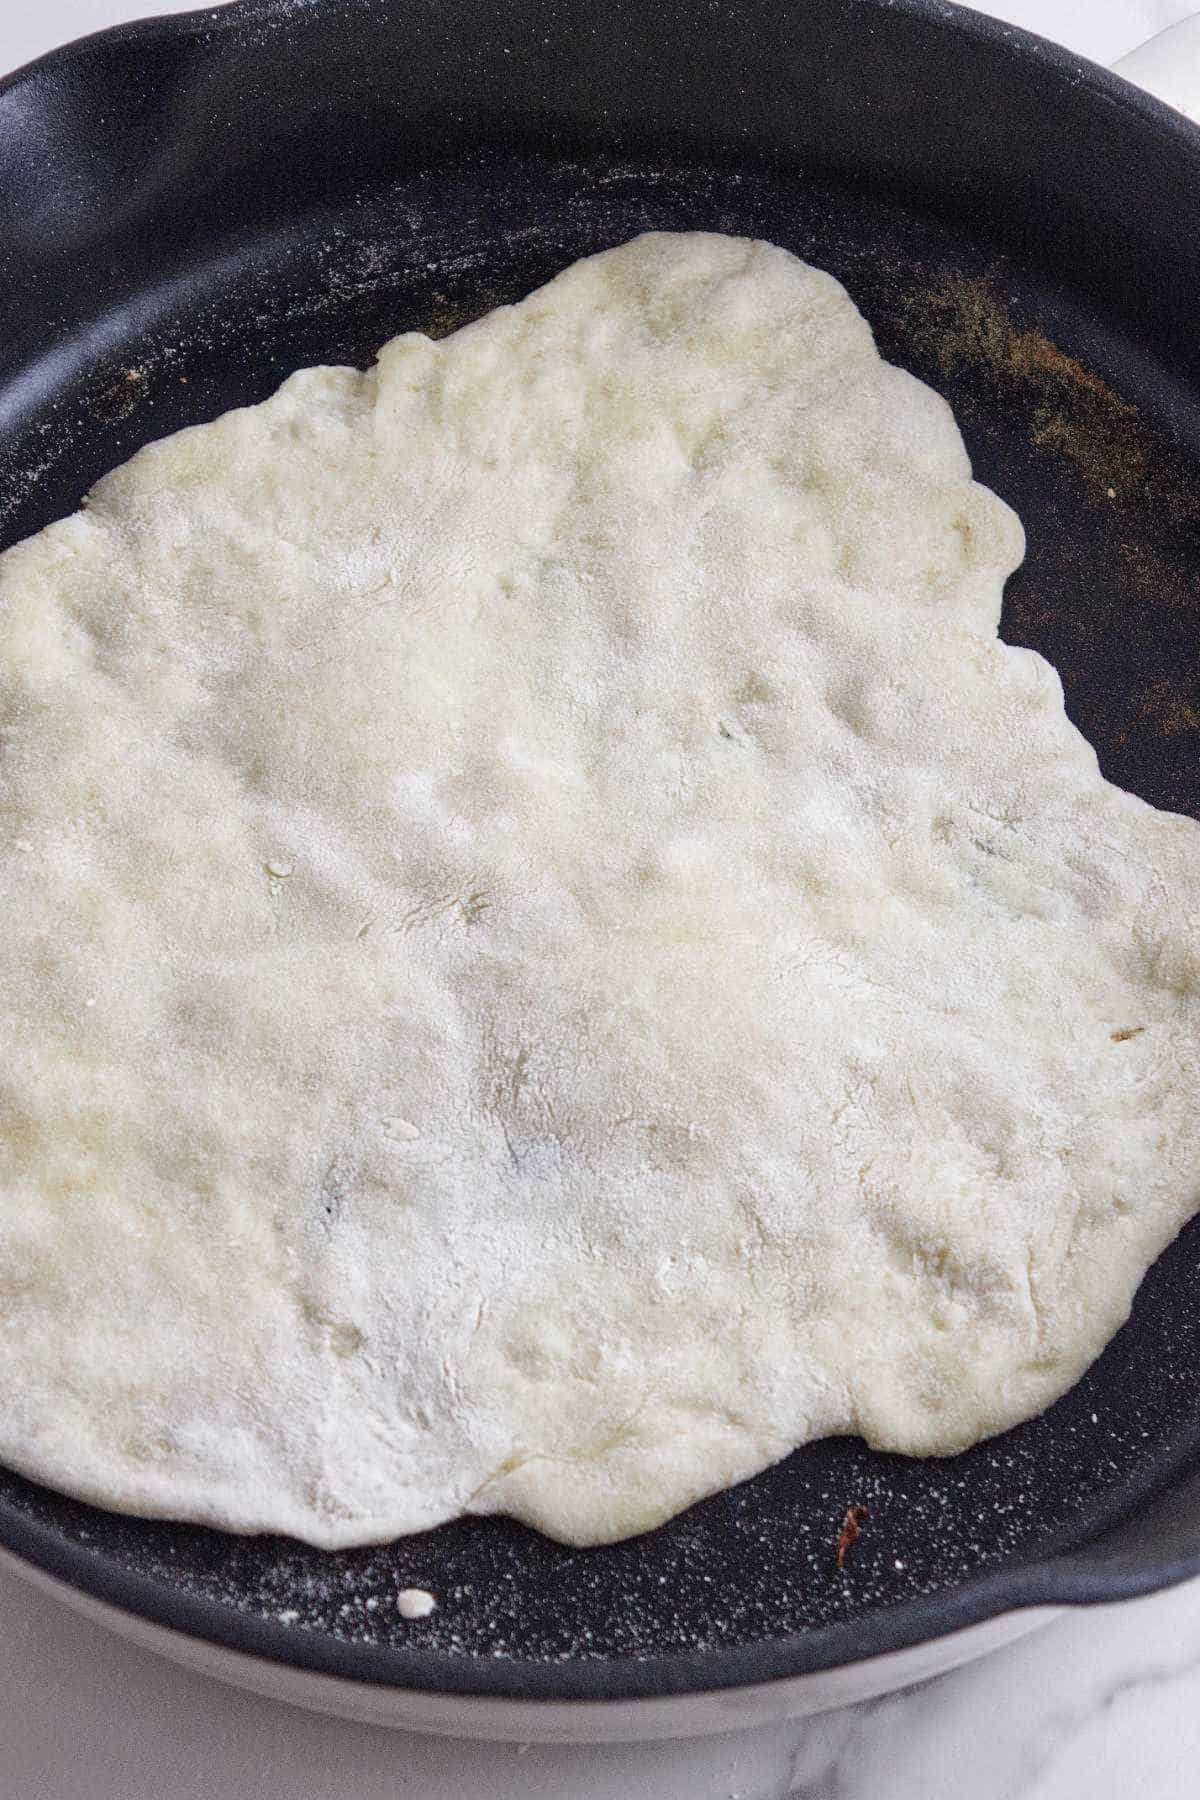 dough being cooked on one side in a hot skillet.